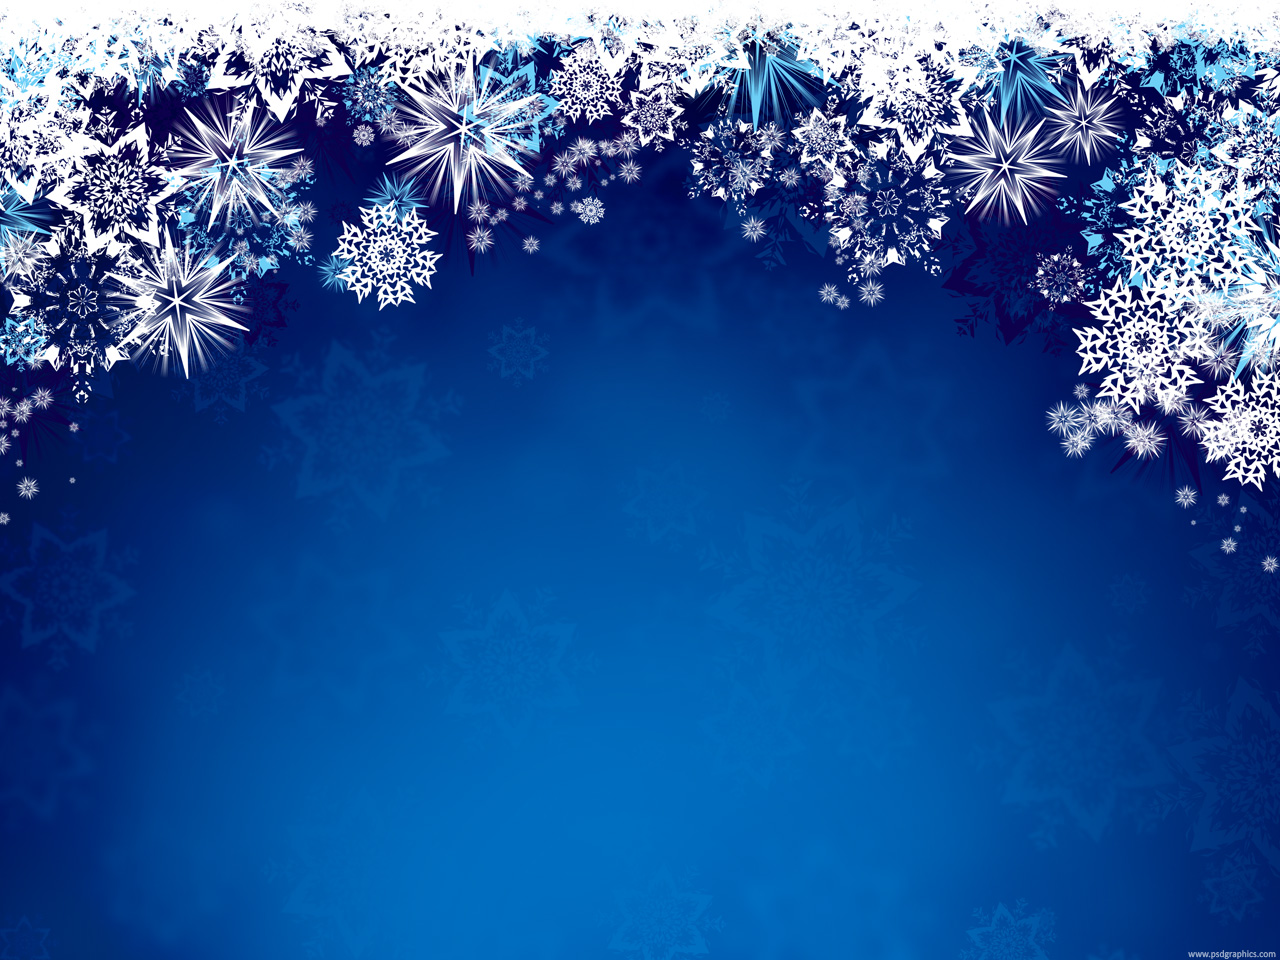 Blue Background with Snow Flakes